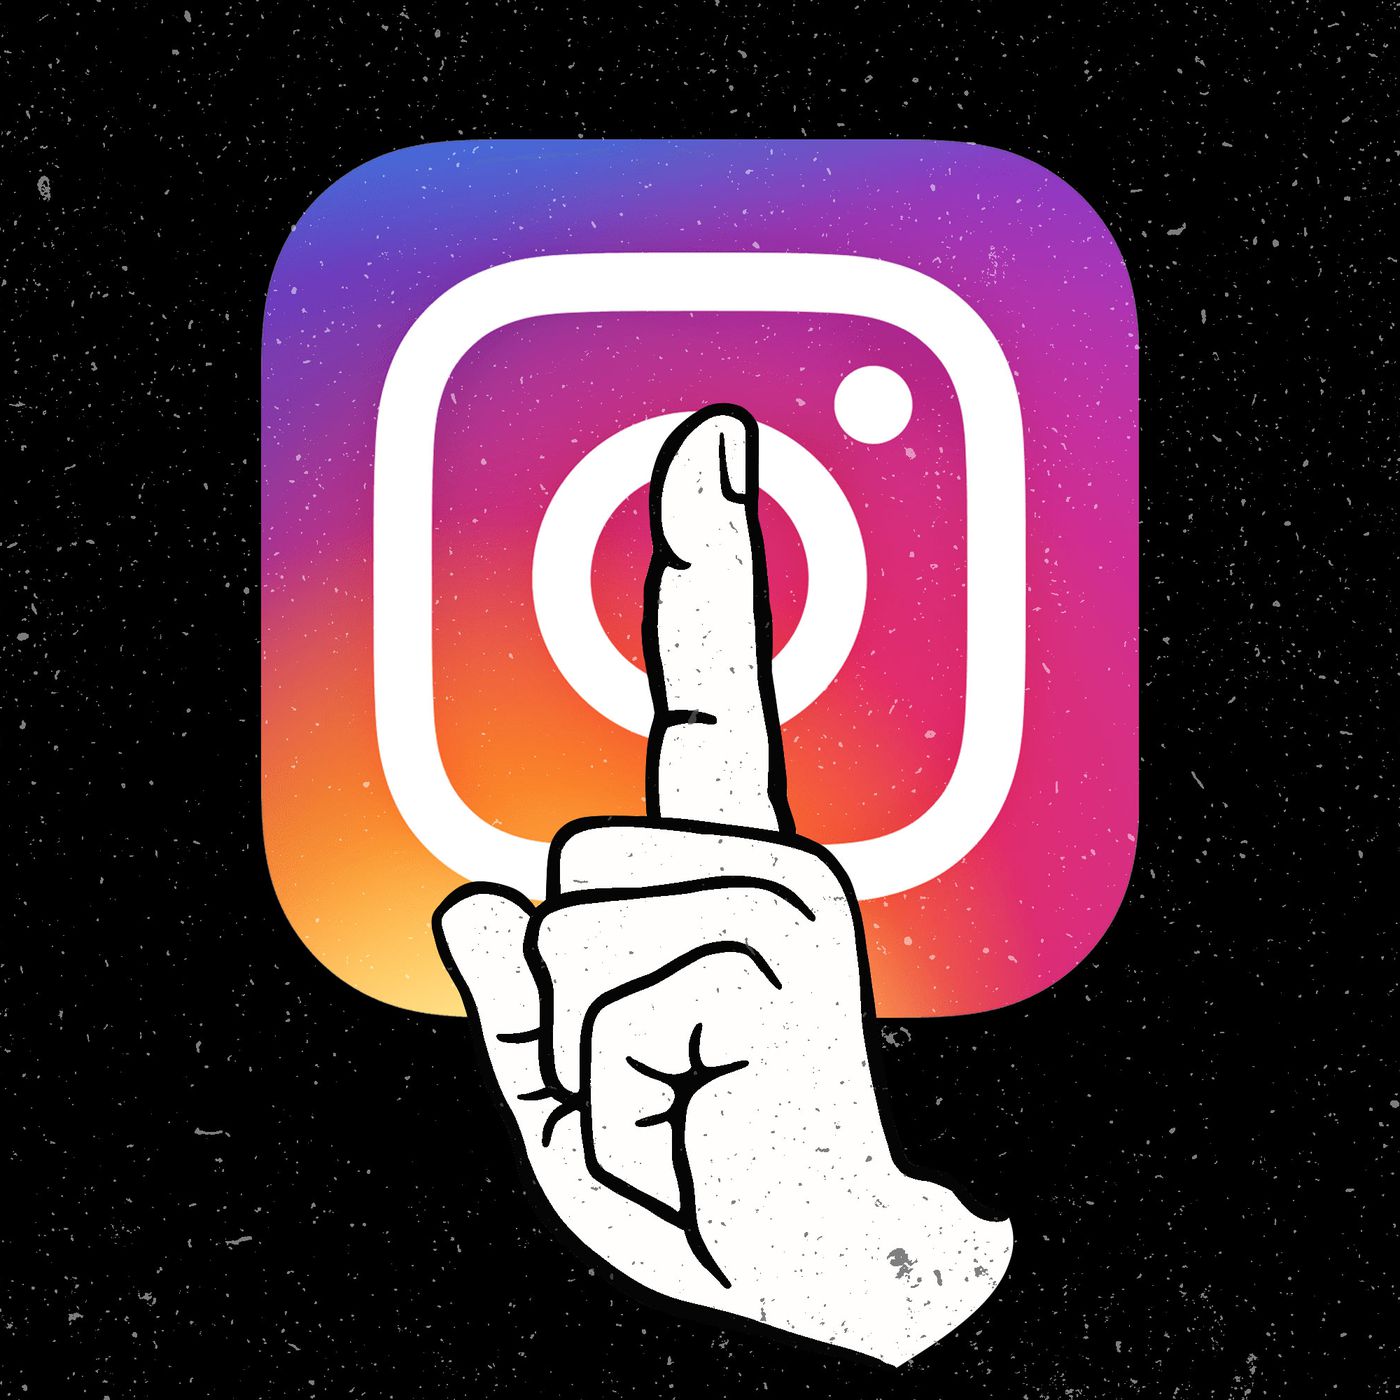 How to mute the sound of Instagram videos?